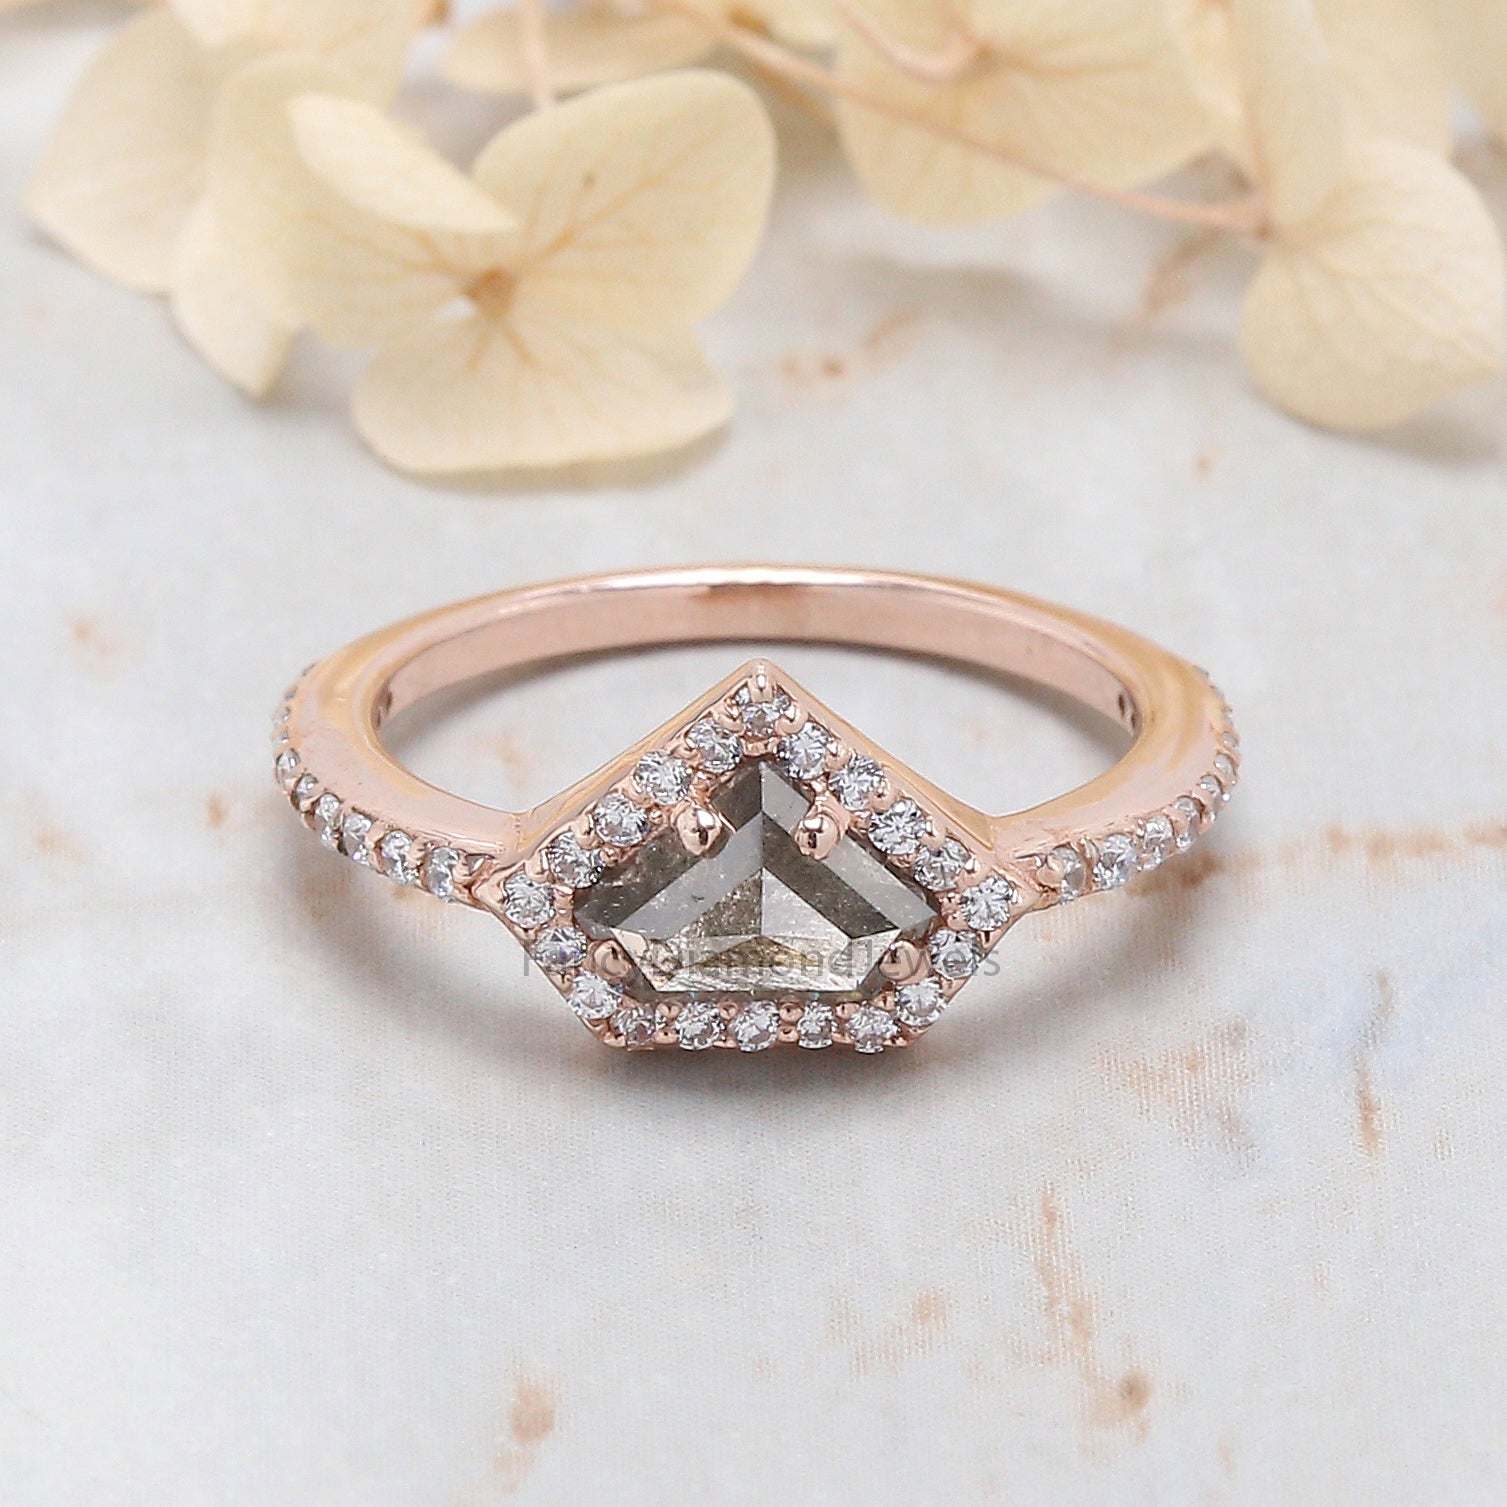 Shield Cut Salt And Pepper Diamond Ring 0.81 Ct 5.50 MM Shield Diamond Ring 14K Solid Rose Gold Silver Engagement Ring Gift For Her QN1251